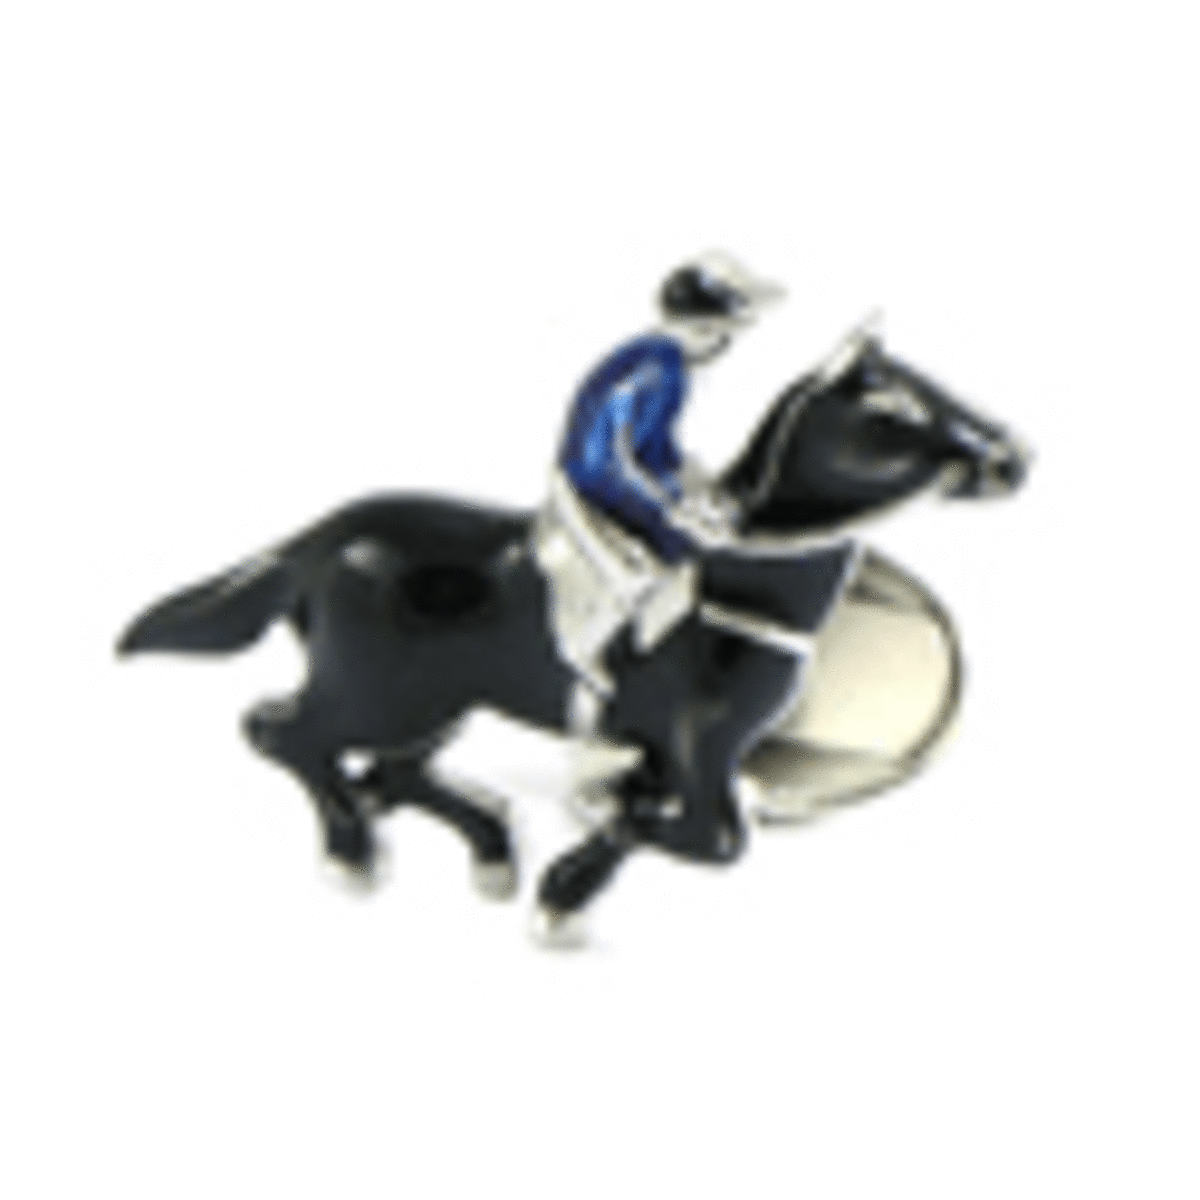 Racing Horse Cuff Link with Jockey in Blue Silk and Black Horse